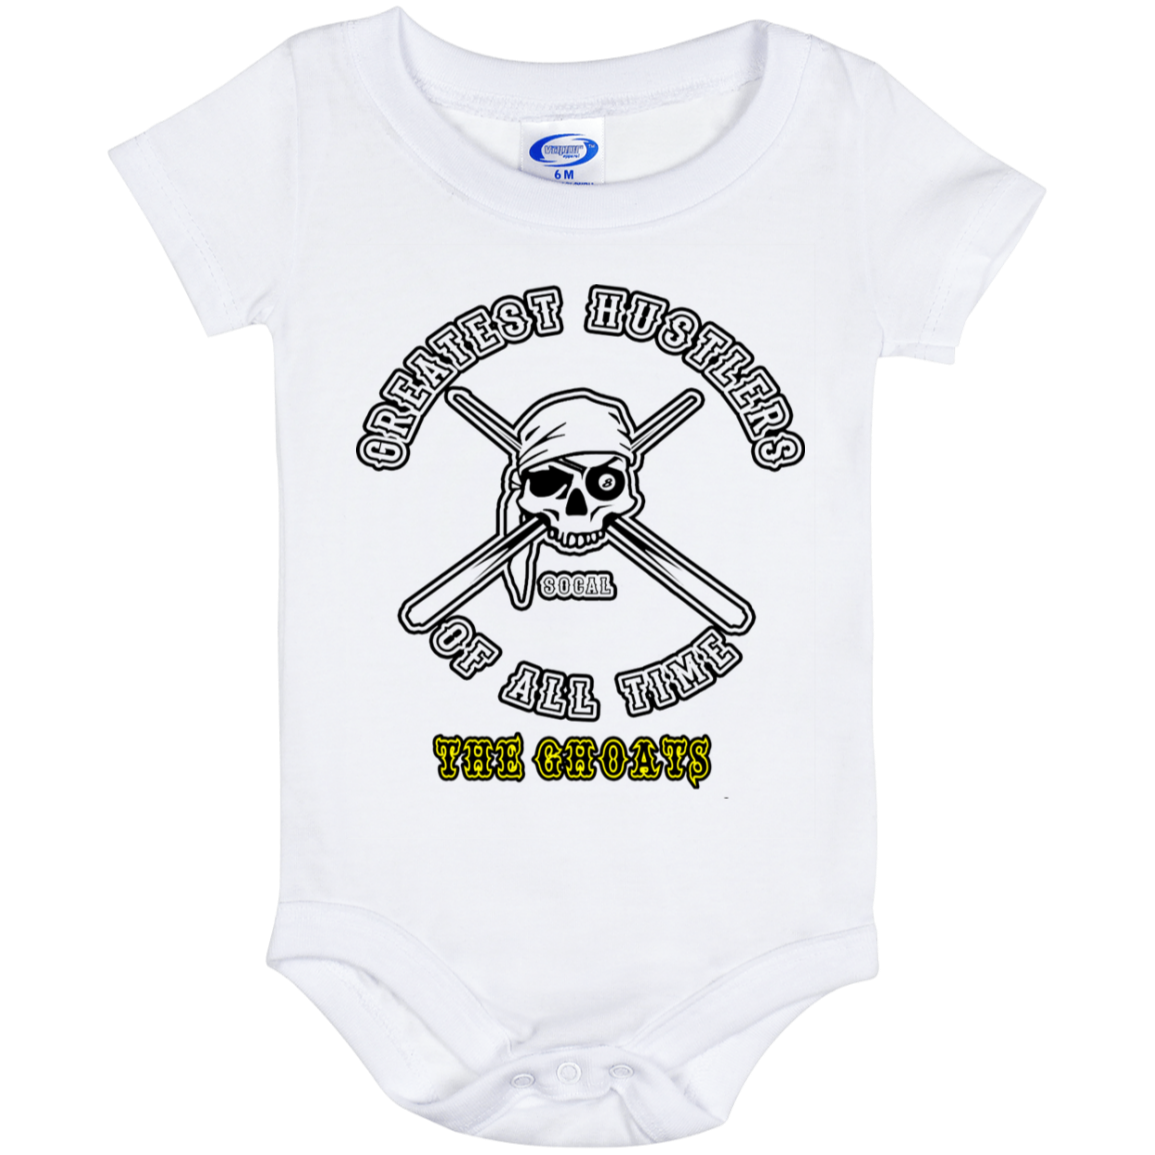 The GHOATS Custom Design. #4 Motorcycle Club Style. Ver 1/2. Baby Onesie 6 Month